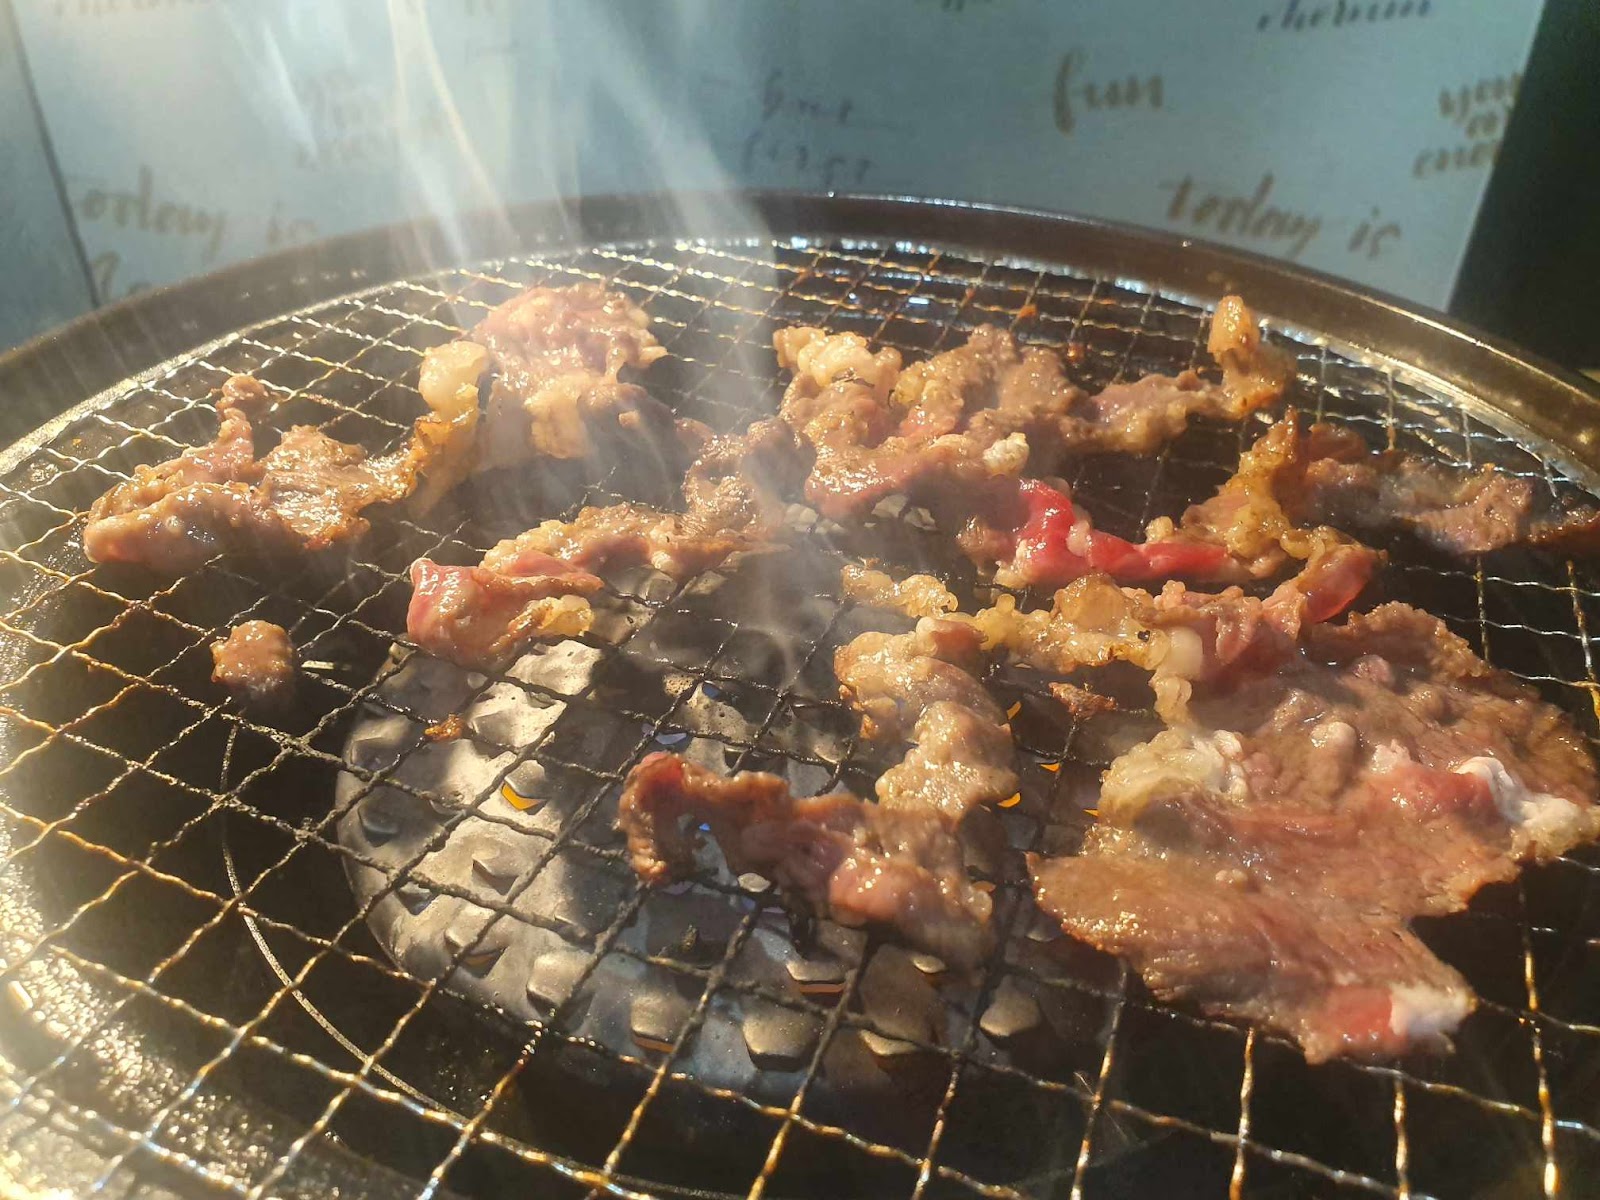 cooked beef on the grill at 焼肉力丸上本町店